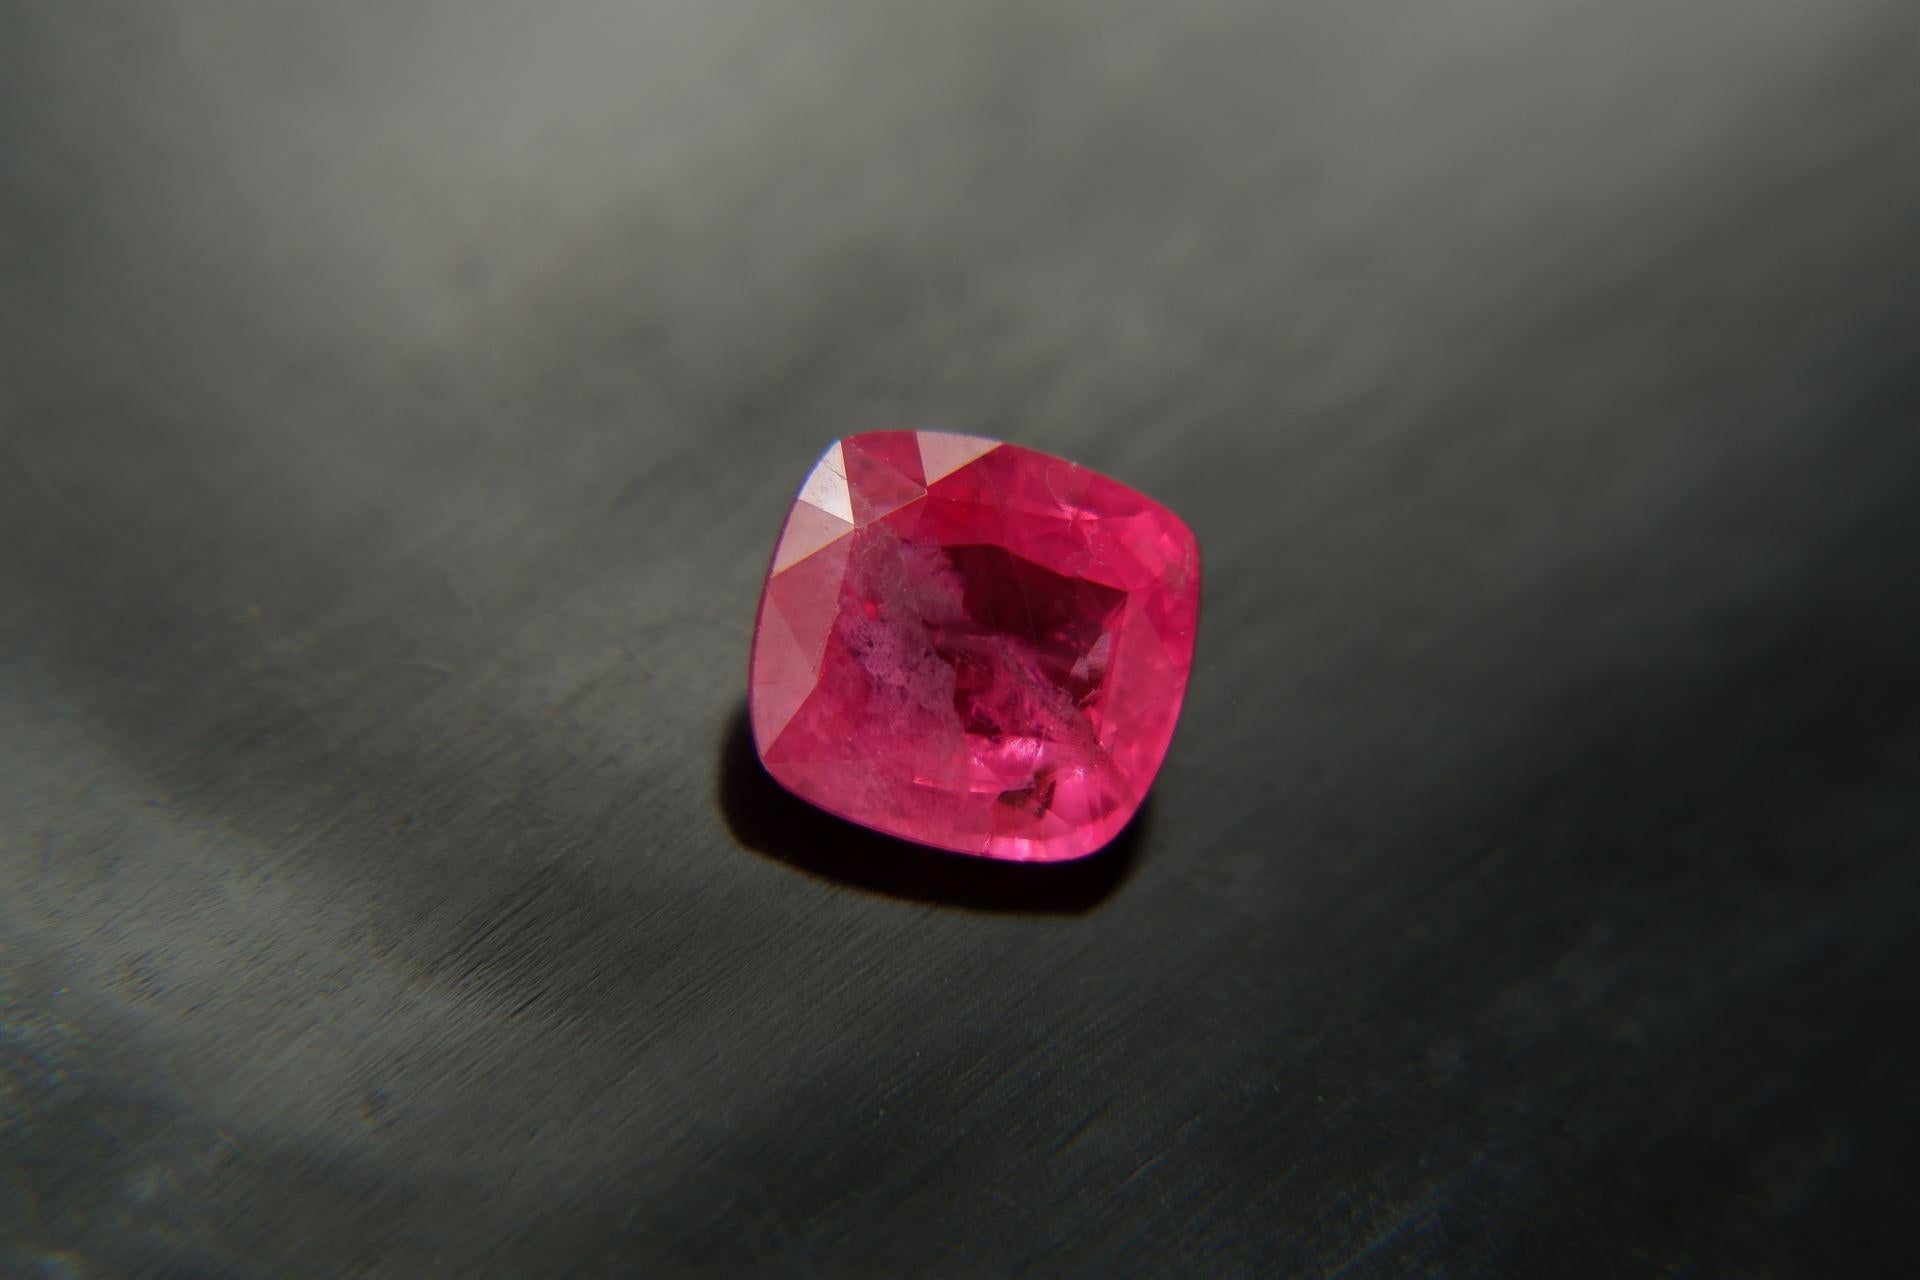 GEMSTONE TYPE: Unheated Natural Spinel
RECOMMENDED JEWELRY SETTINGS: Men Rings, Men Jewelry, Women Vintage Rings, Art Jewelry, RARE Rings, RARE Jewelry
CERTIFICATE: AGL/GIA Full Lab Report included
ORIGIN: Tanzania
CARAT SIZE: 2.383
DIMENSIONS: